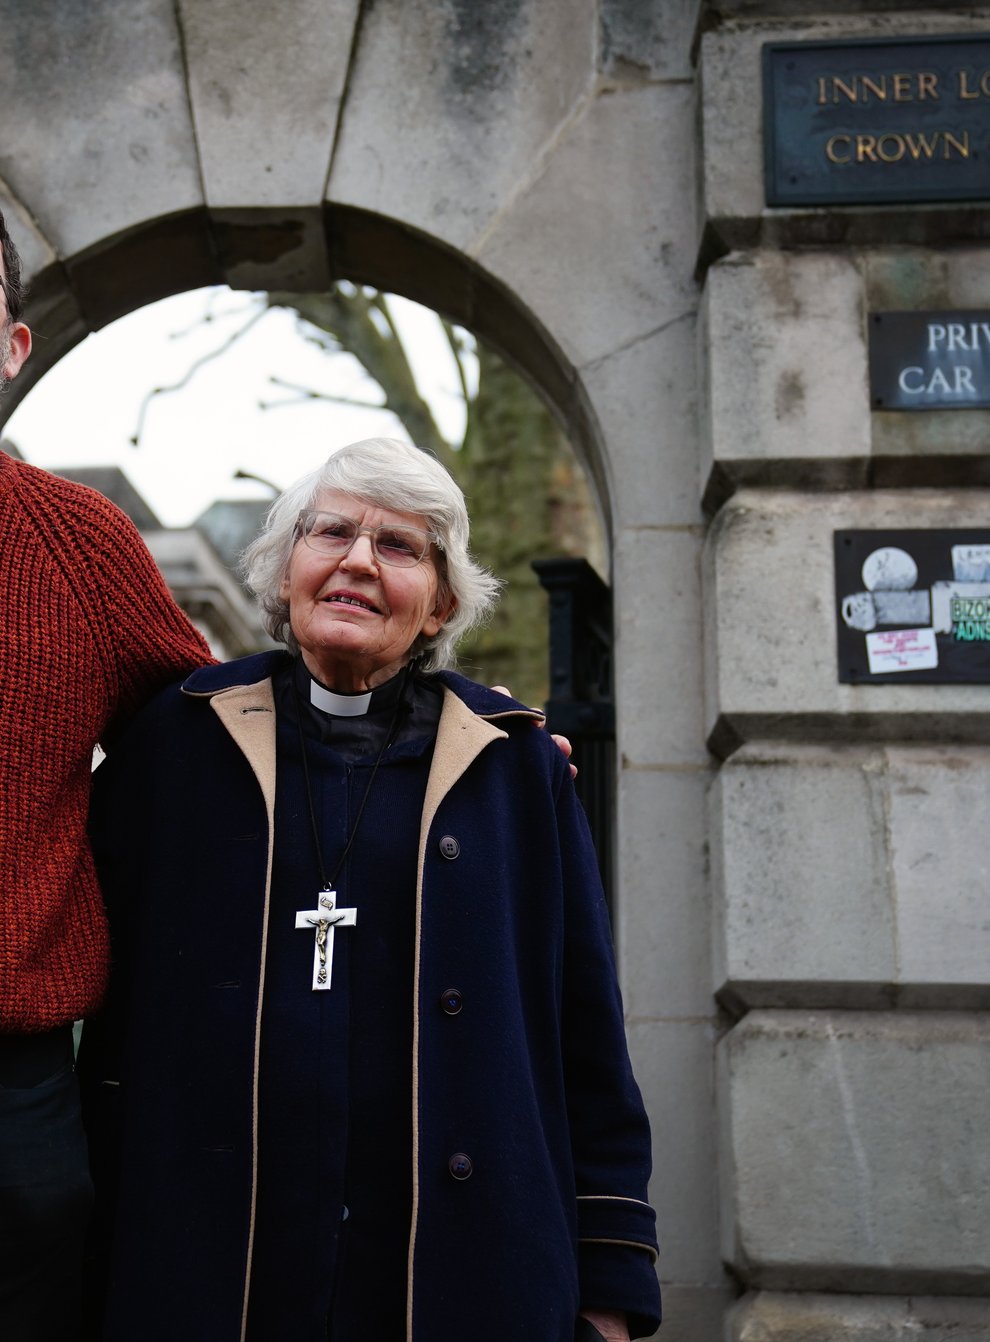 Father Martin Newell and Reverend Sue Parfitt, 79, outside Inner London Crown Court (Victoria Jones/PA)